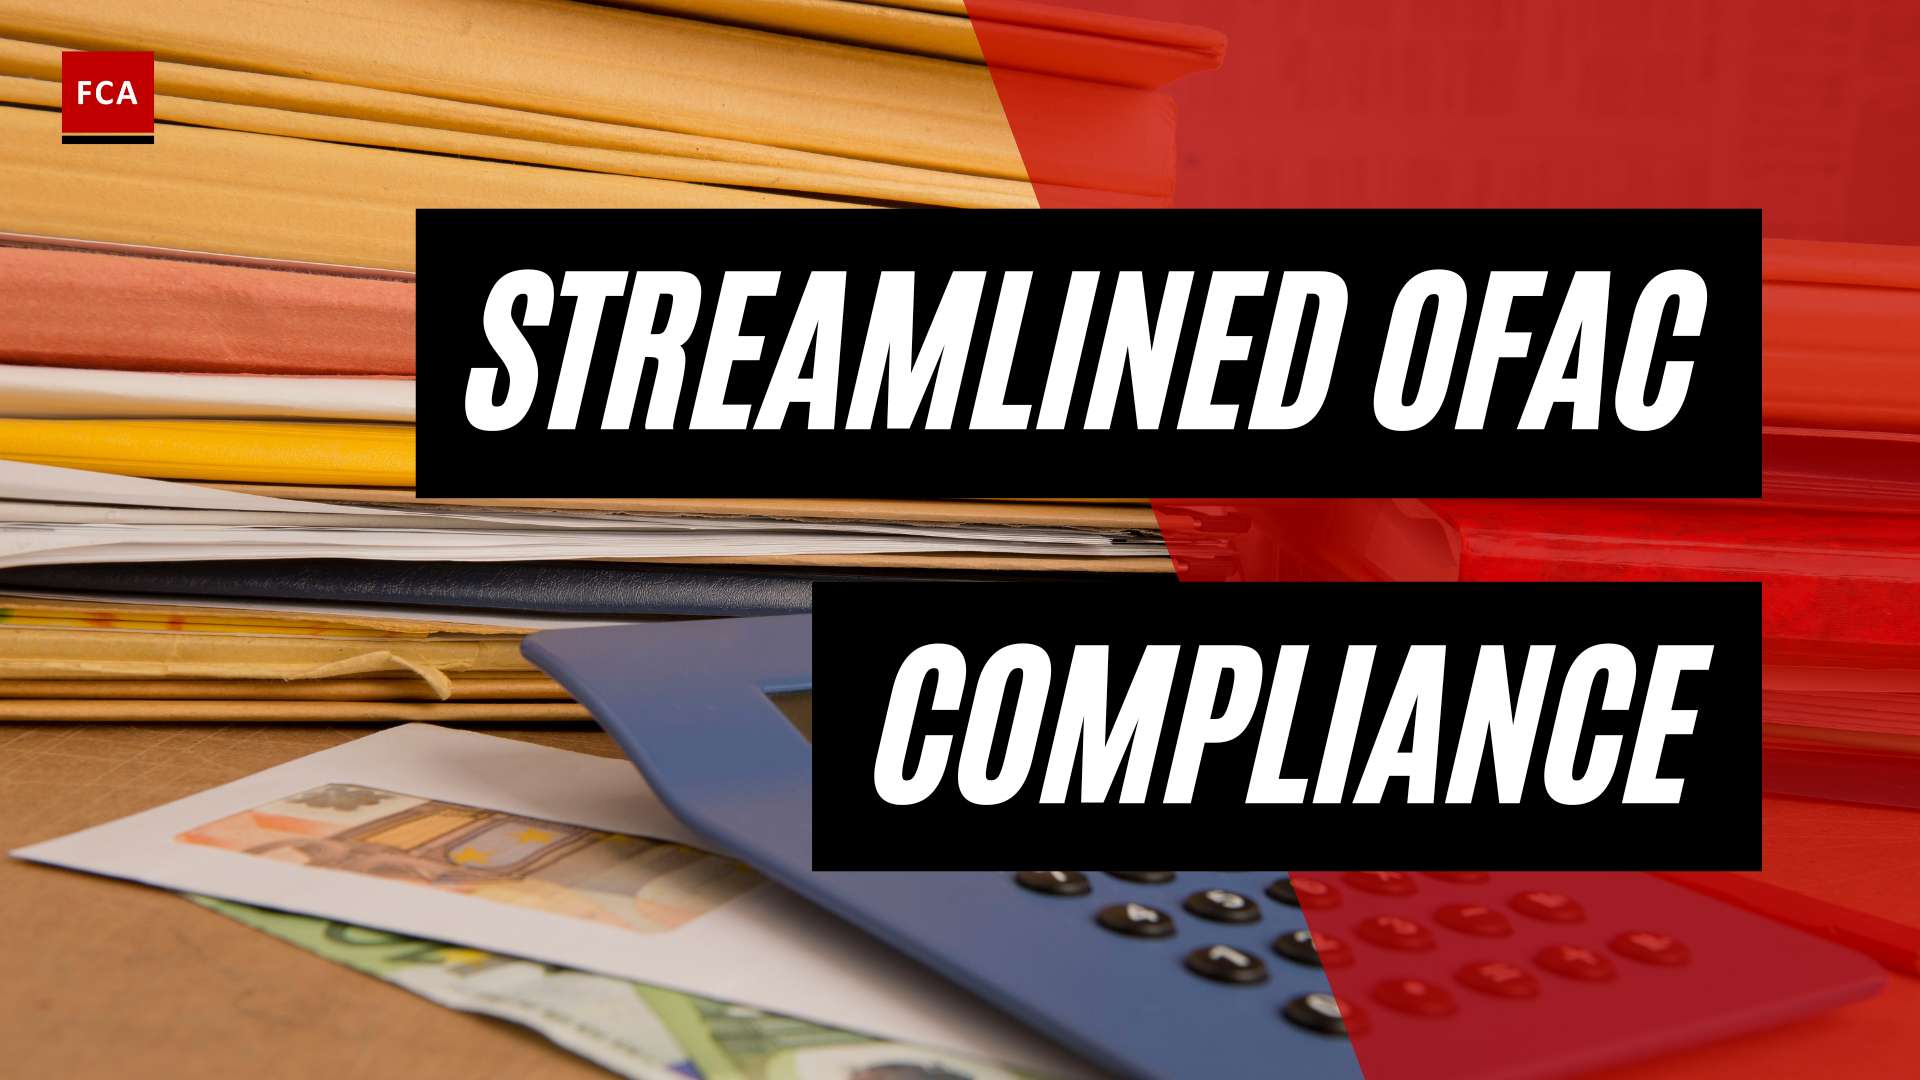 Ofac Compliance Requirements Made Simple: Your Go-To Guide